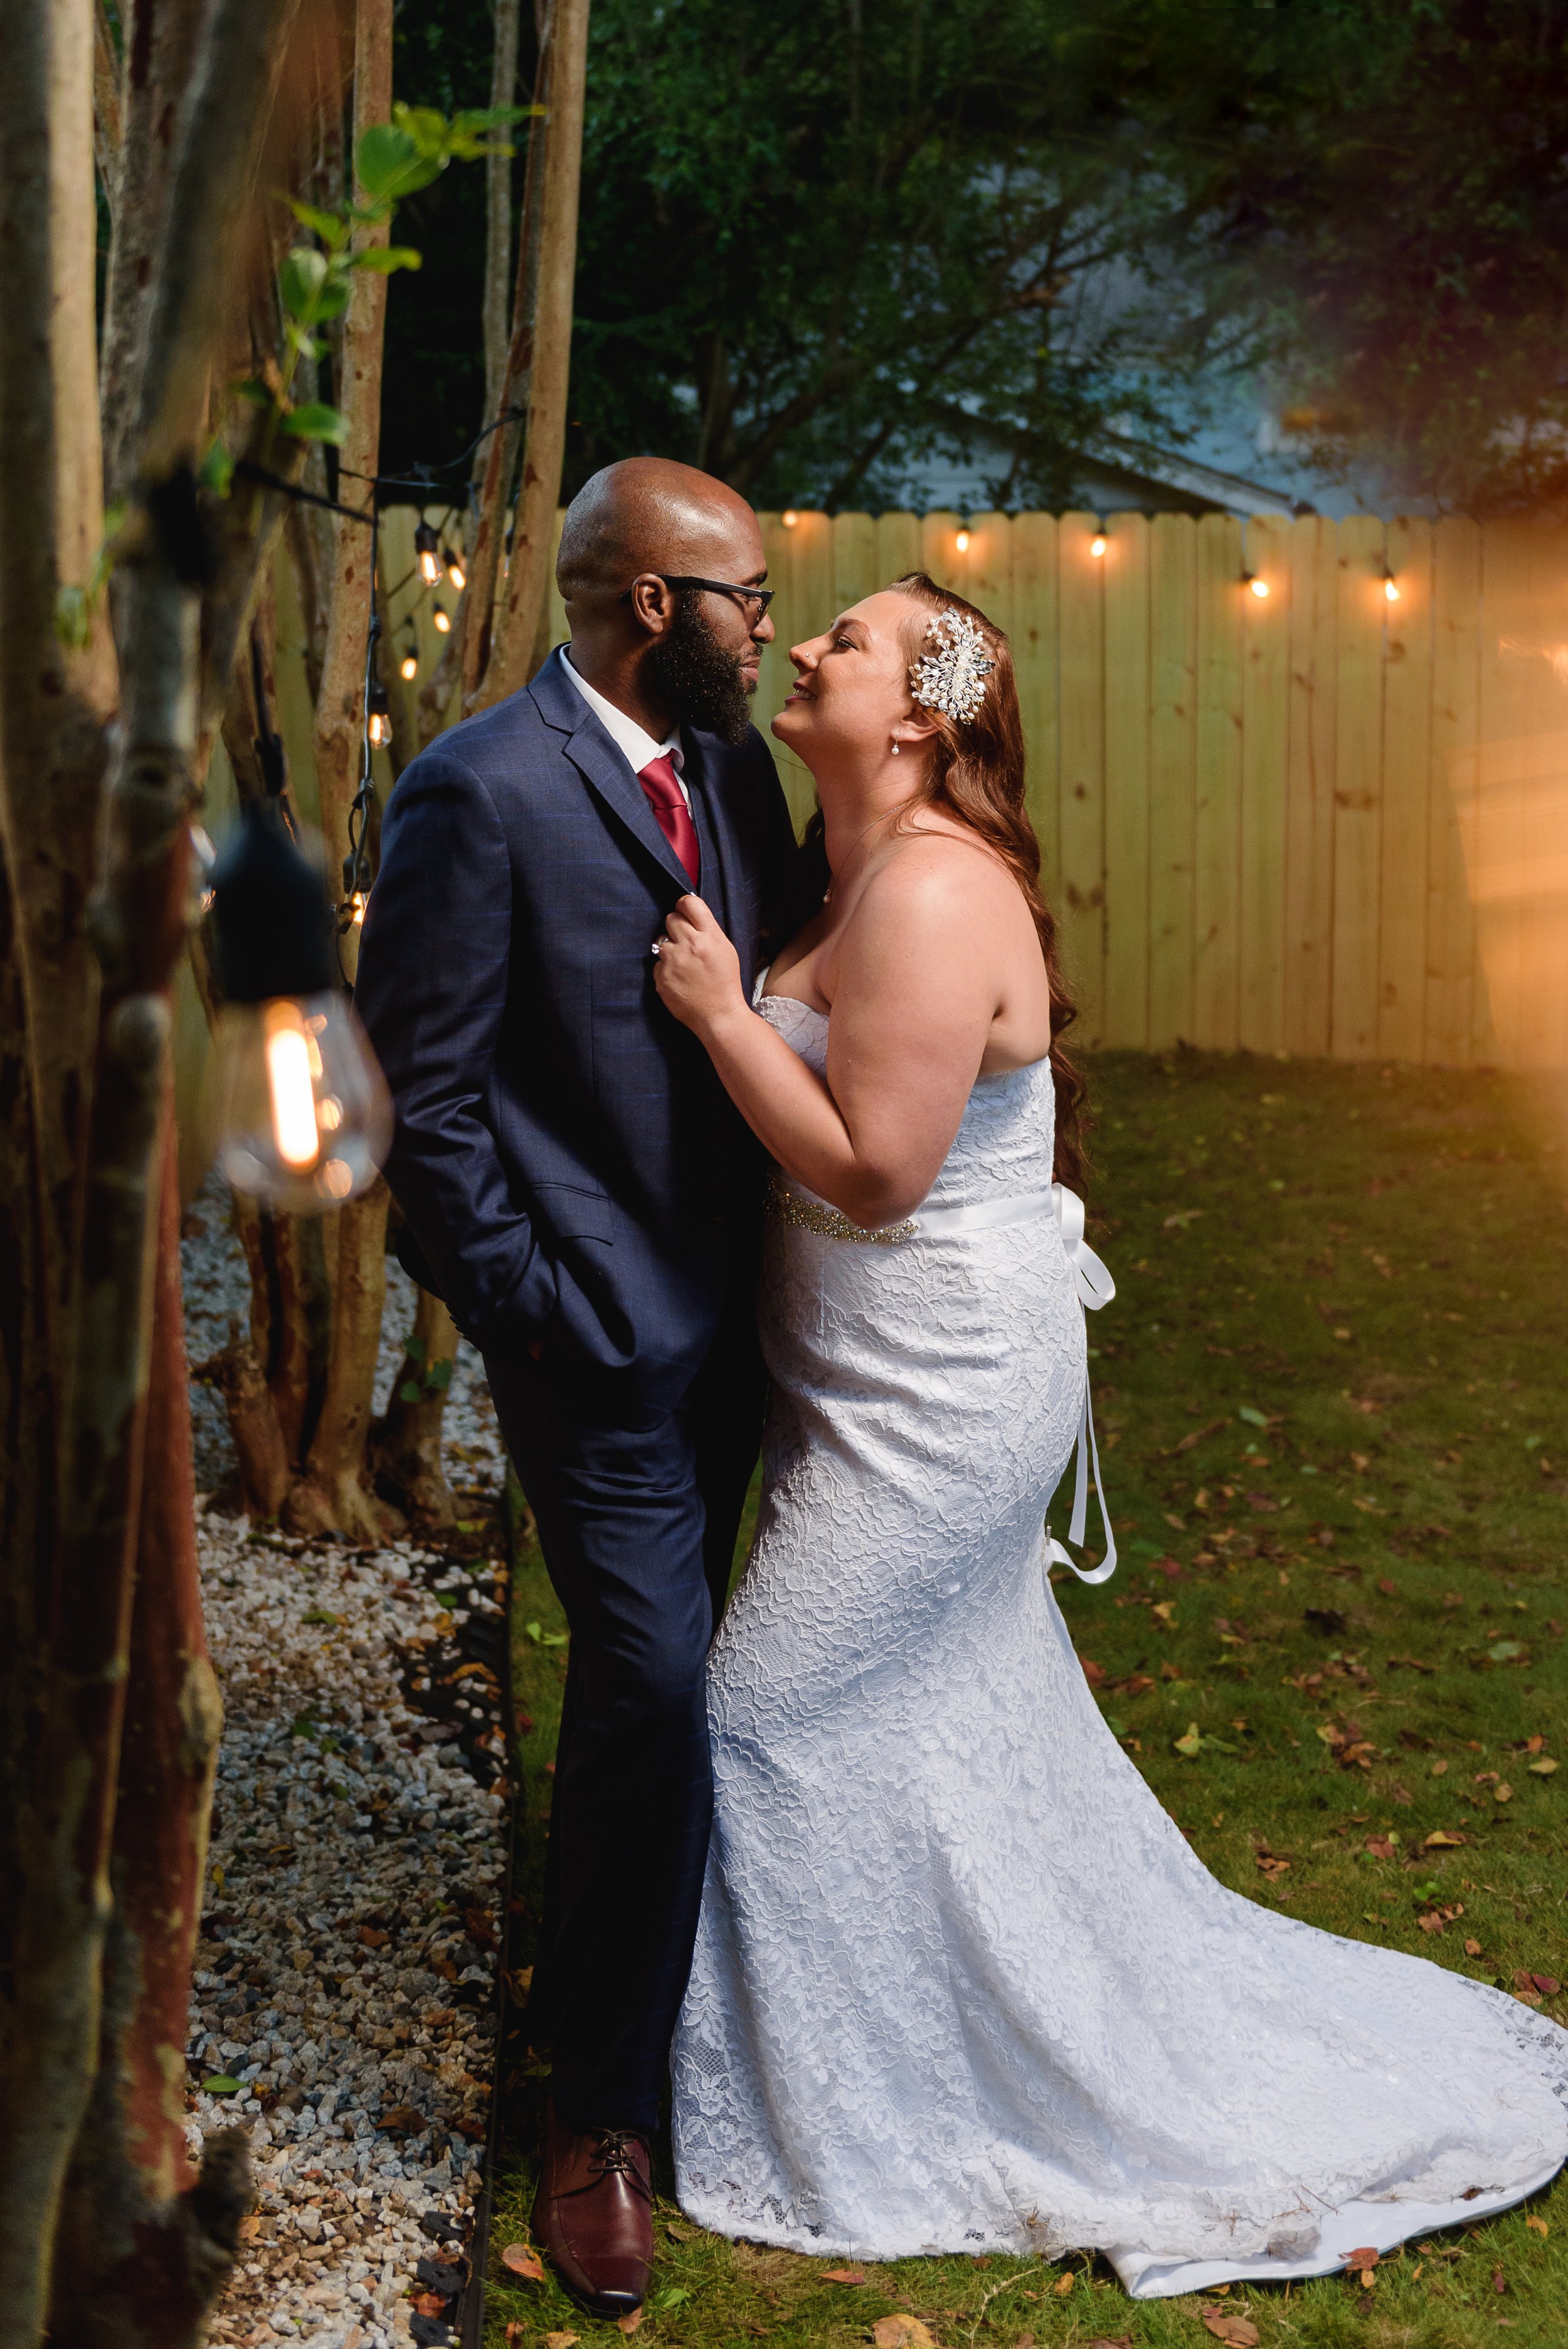 Newlywed Bride and Groom take a photo together at their backyard intimate wedding ceremony in Hapeville, Georgia